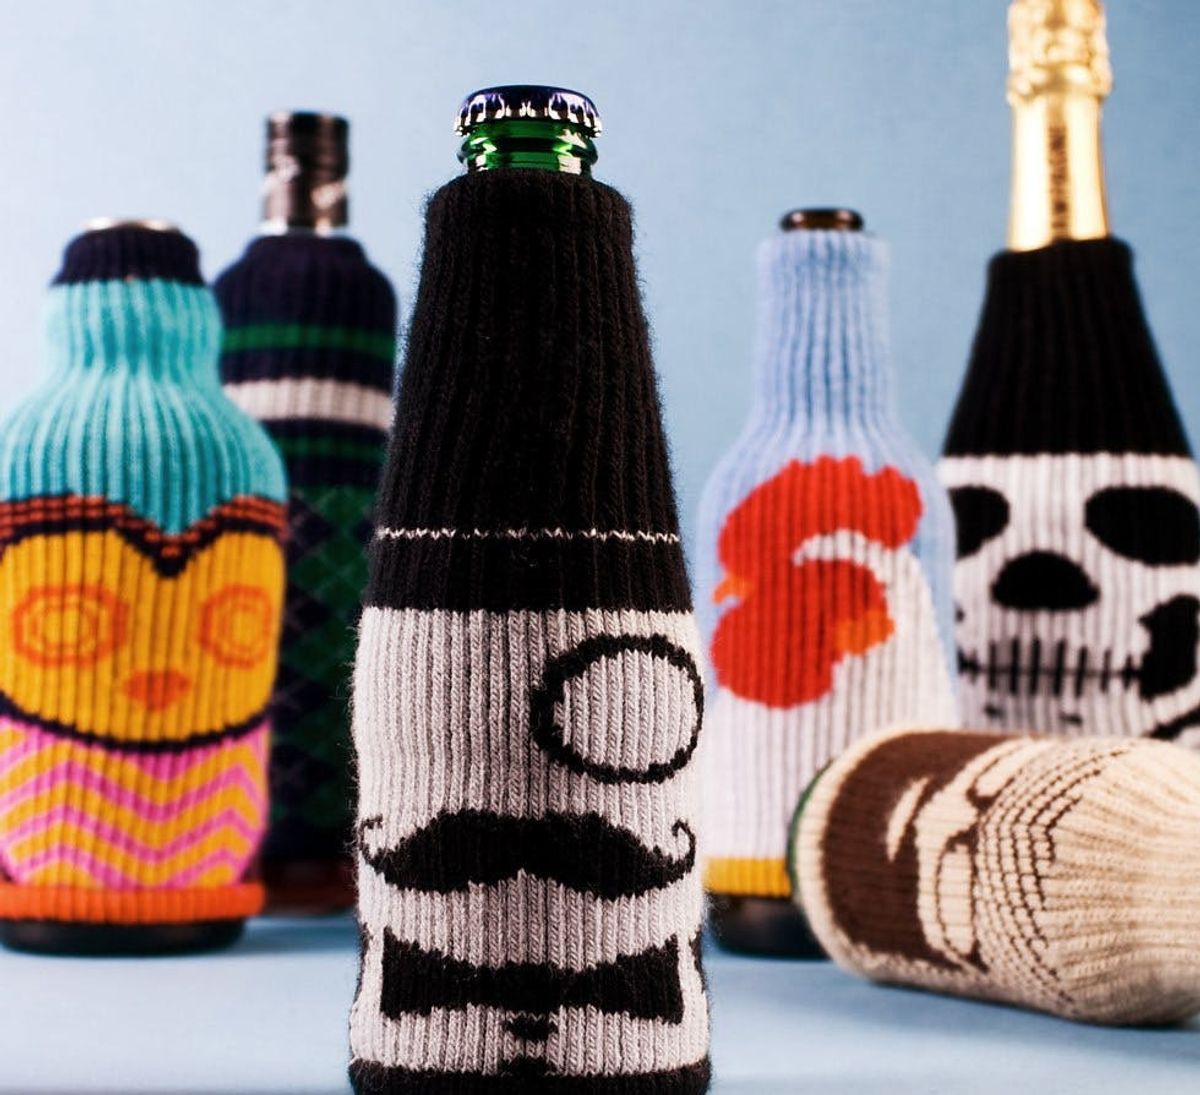 It’s Beer O’Clock! 15 Cozzies, Cozies, and Coozies